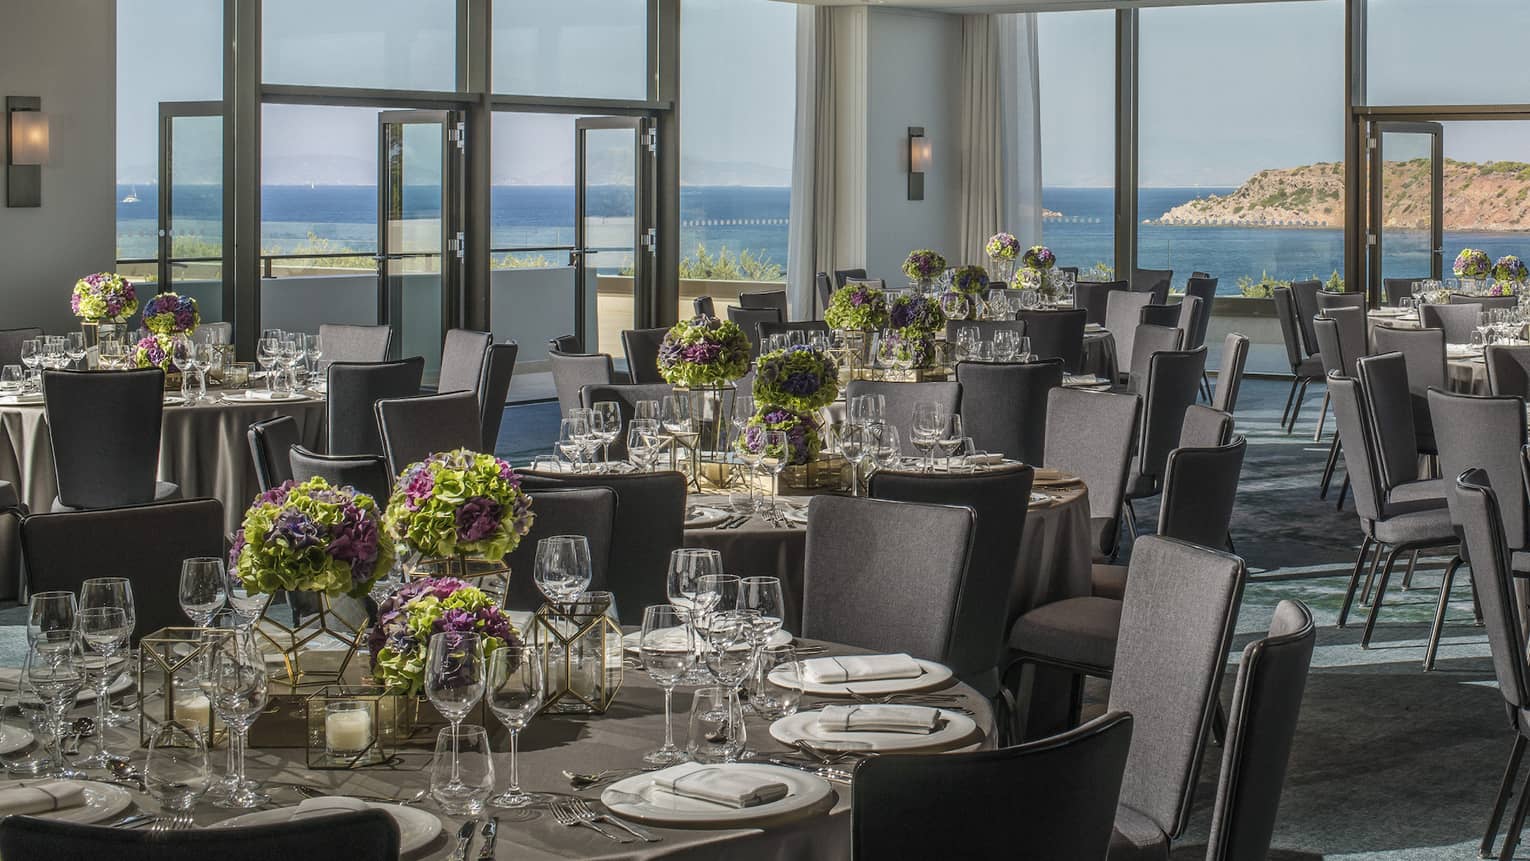 Light filled Nafsika Ballroom with round tables, grey chairs, flowers, wine glasses overlooking ocean 